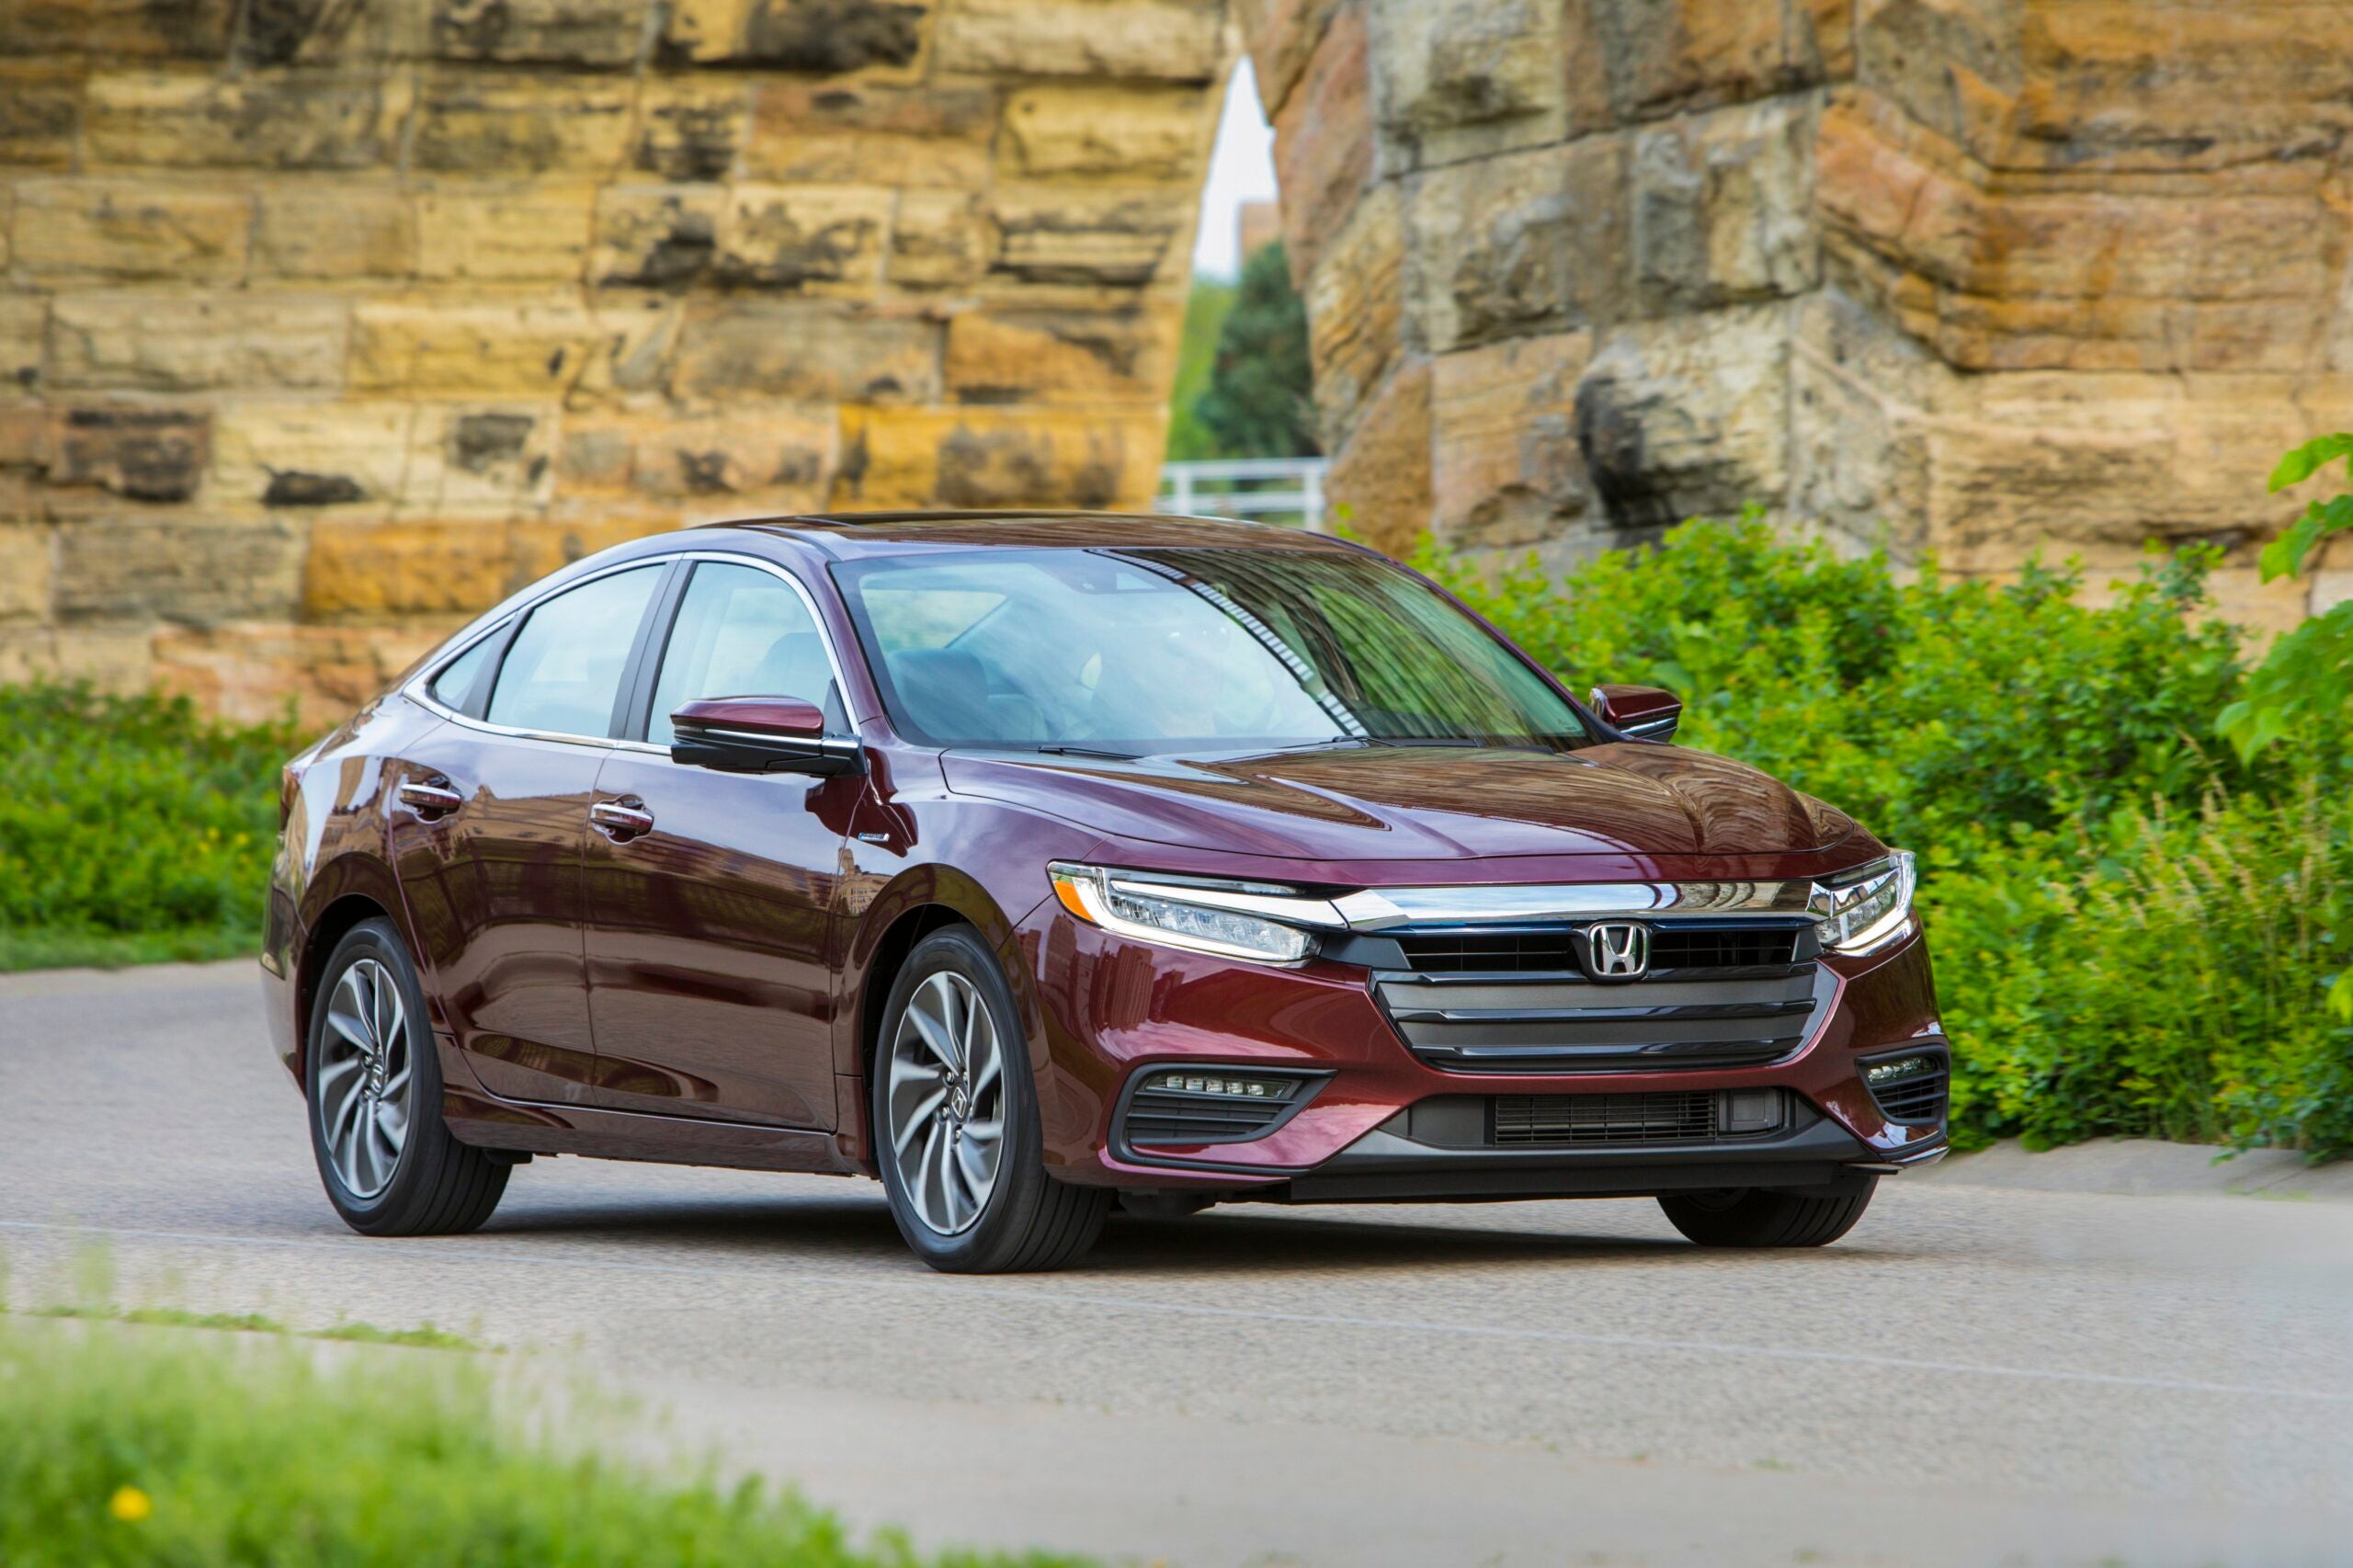 Honda adds a more affordable hybrid to its lineup with the 2019 Insight